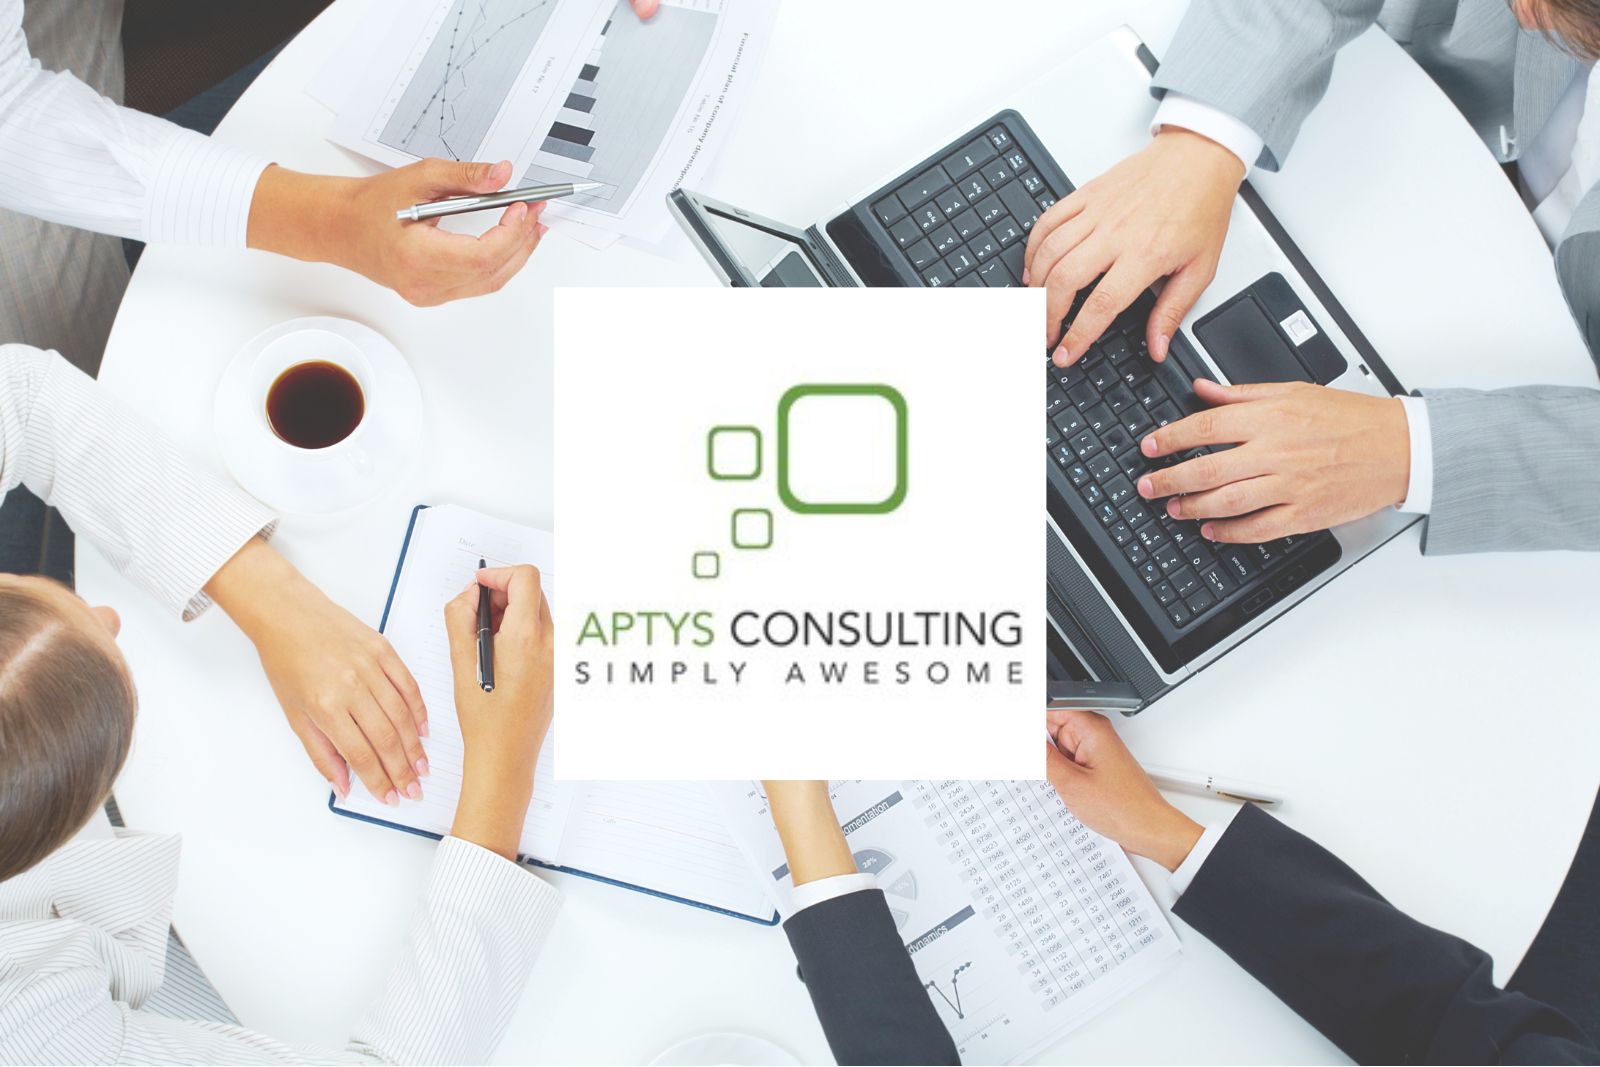 Aptys Consulting